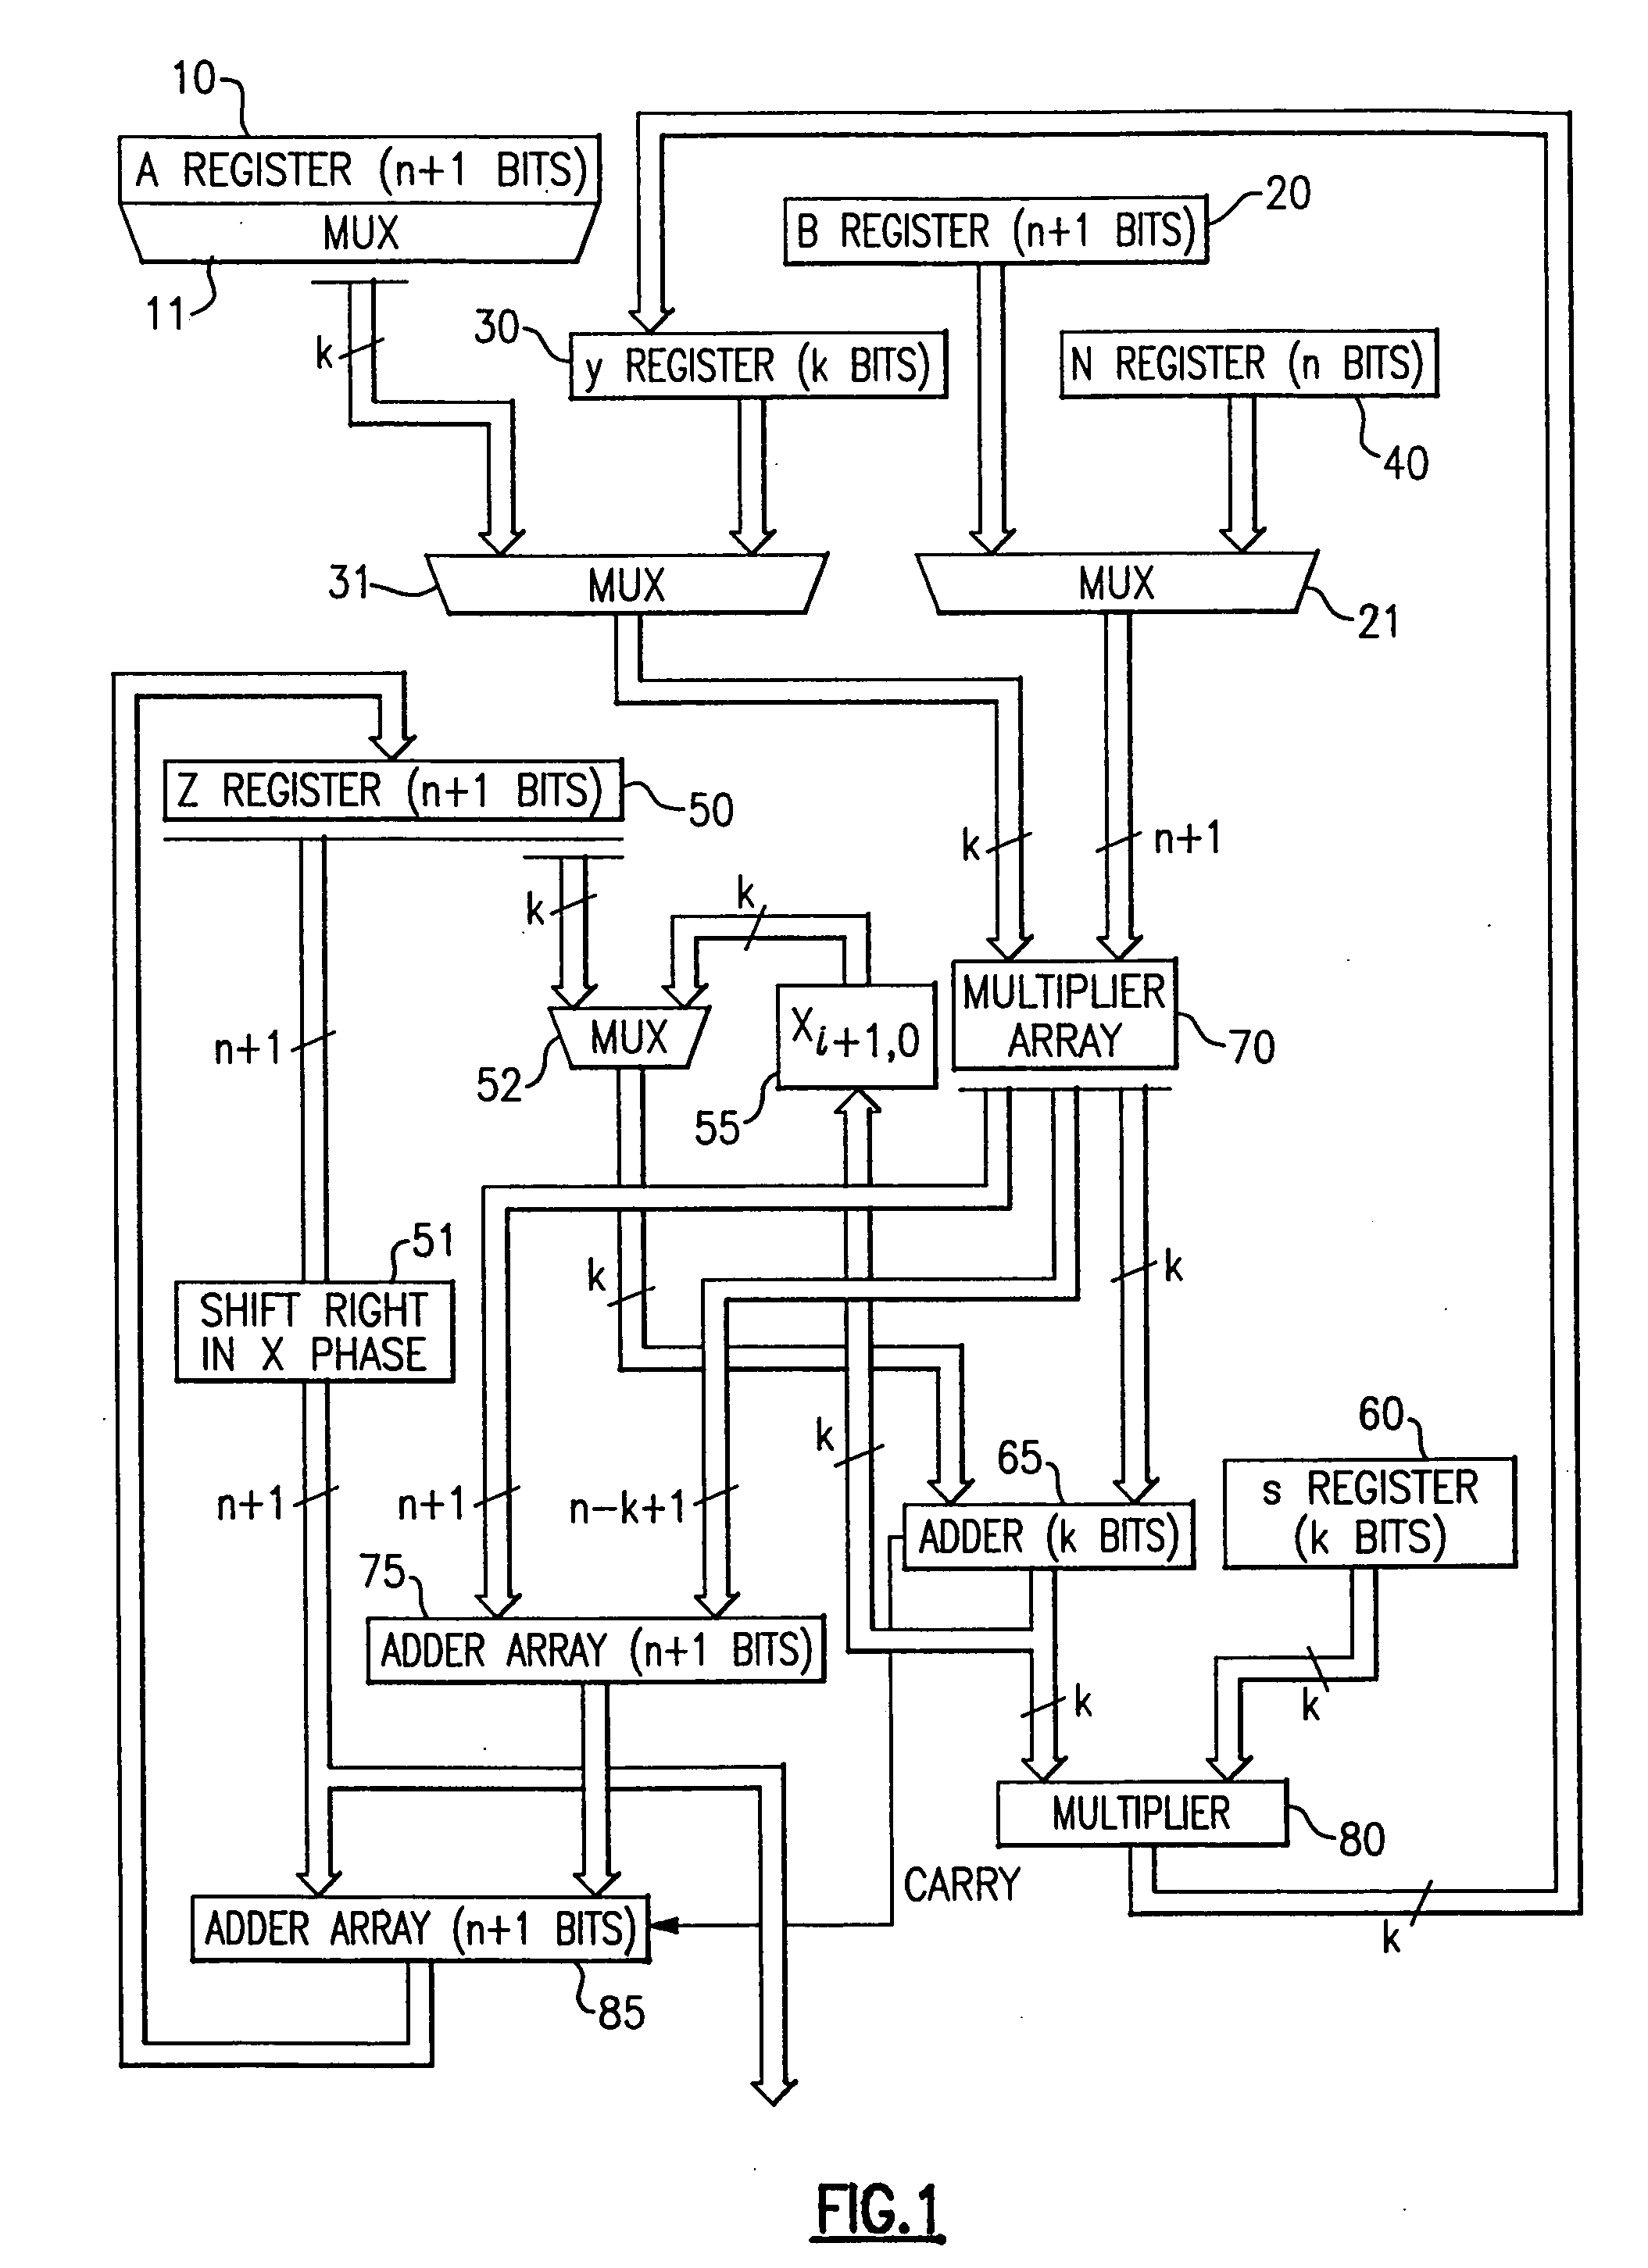 Circuits and methods for modular exponentiation